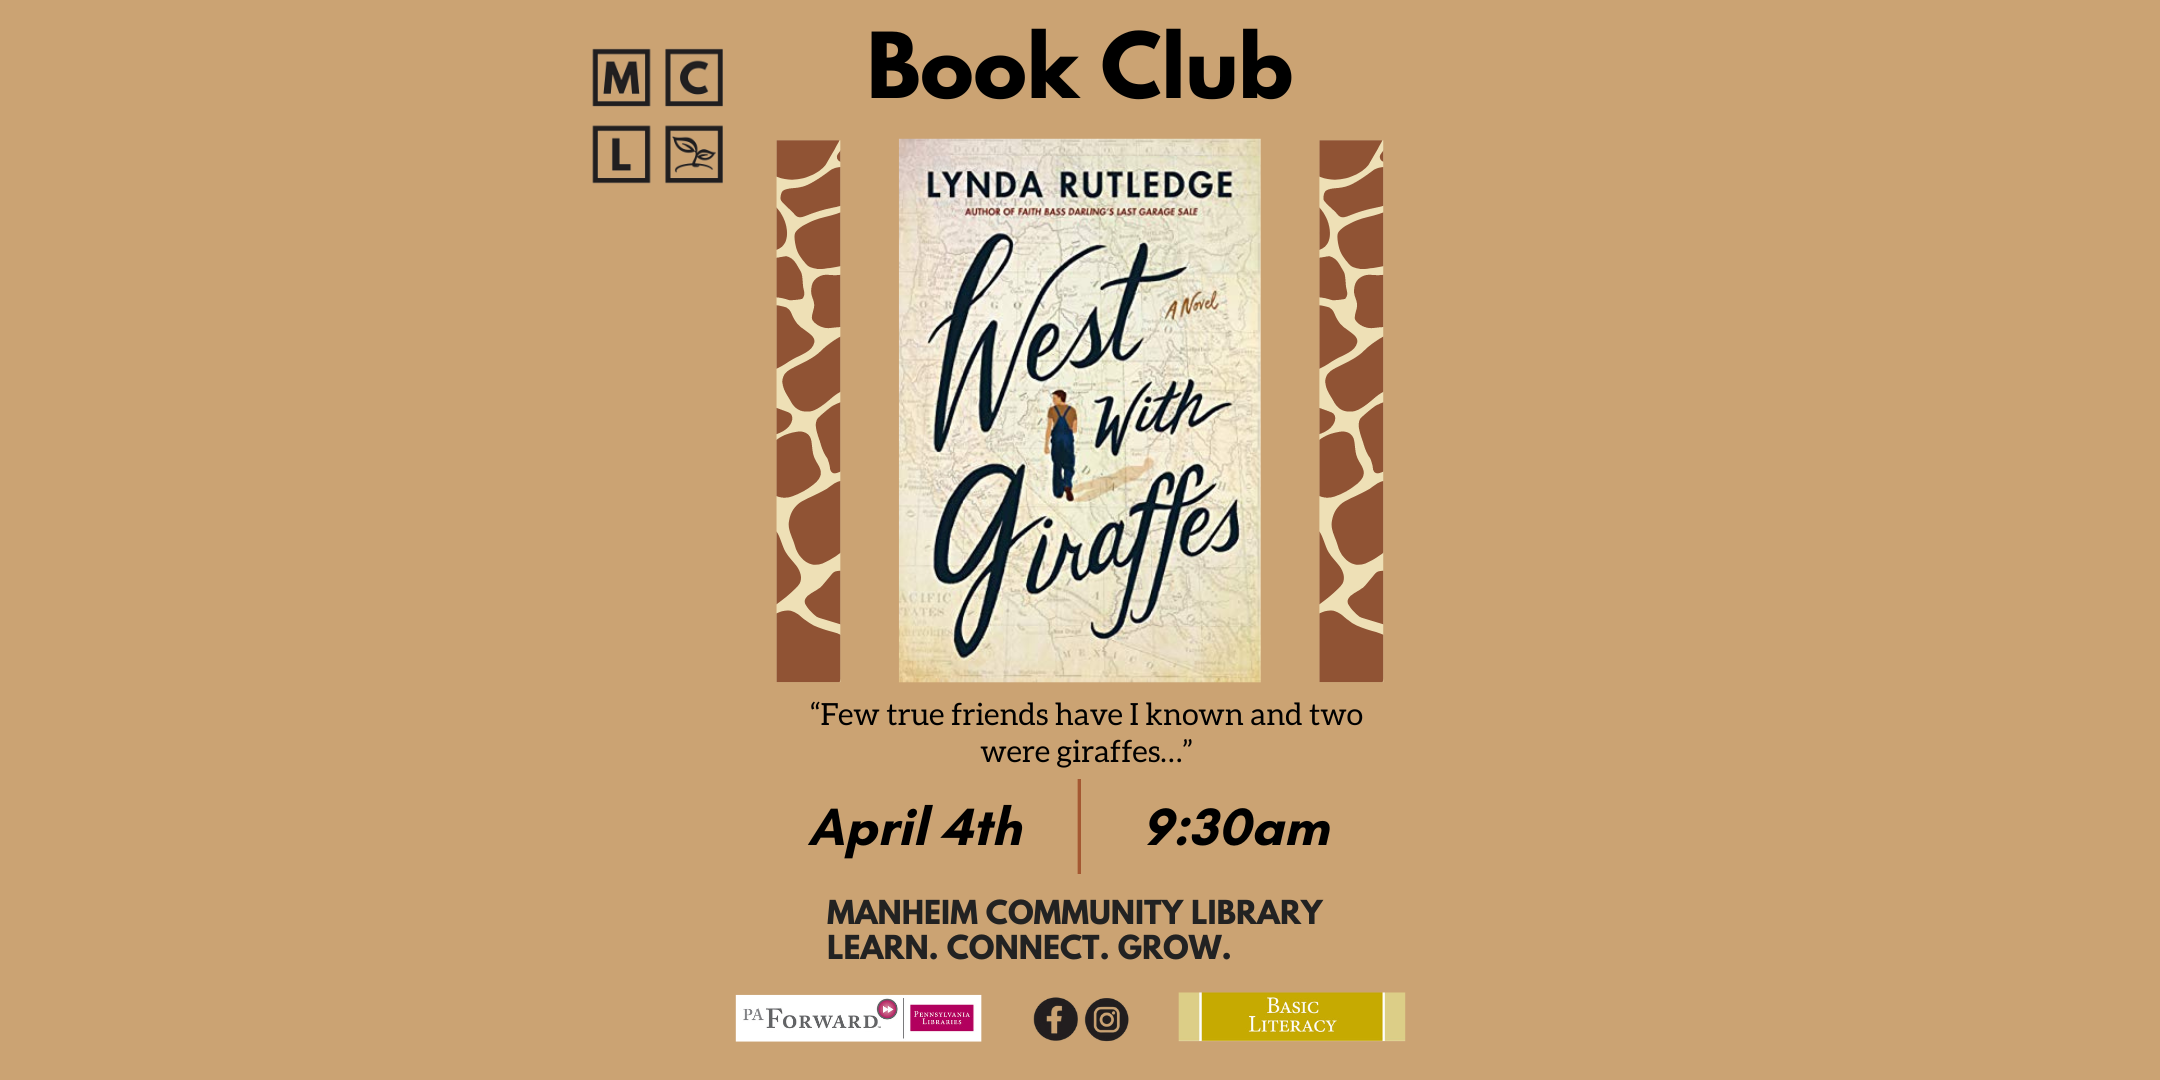 Book Club on Thursday, April 4th at 9:30am